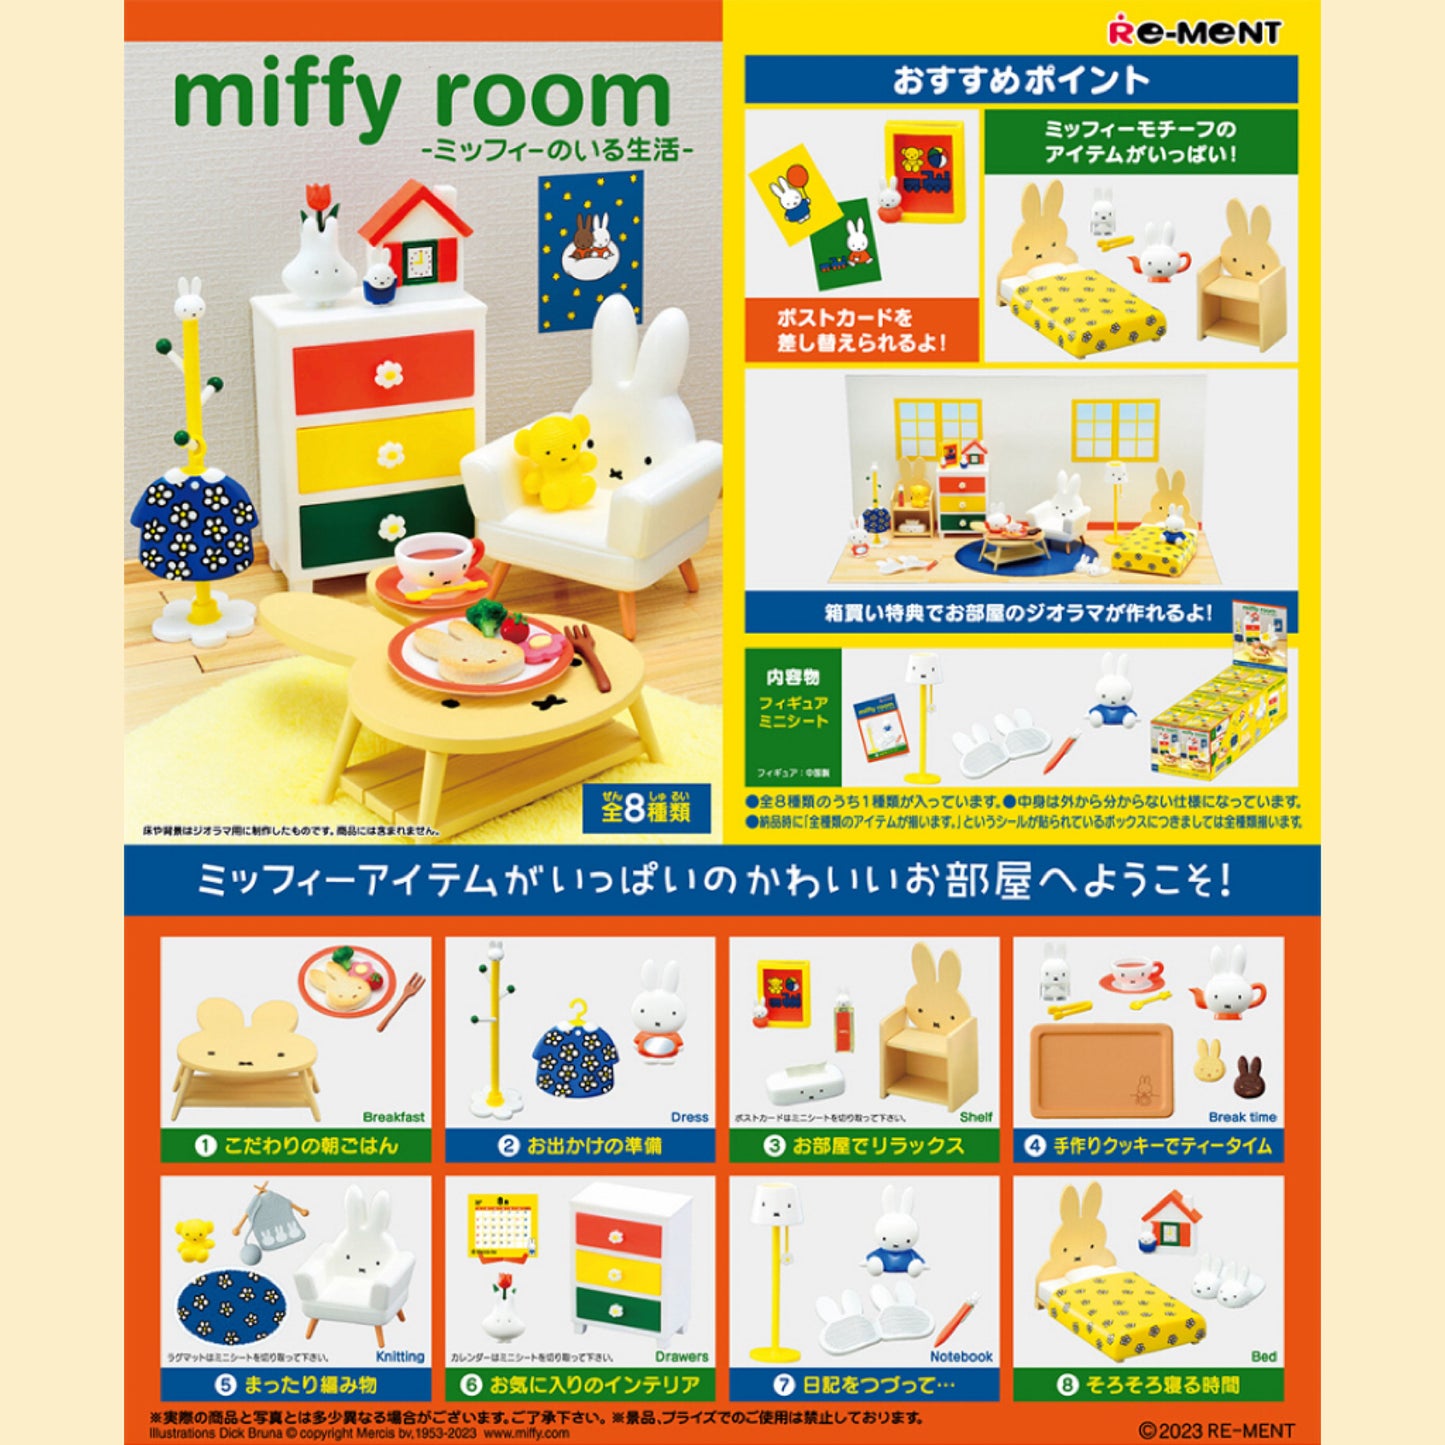 [Order] Re-ment miniature figure - Miffy Room Life 